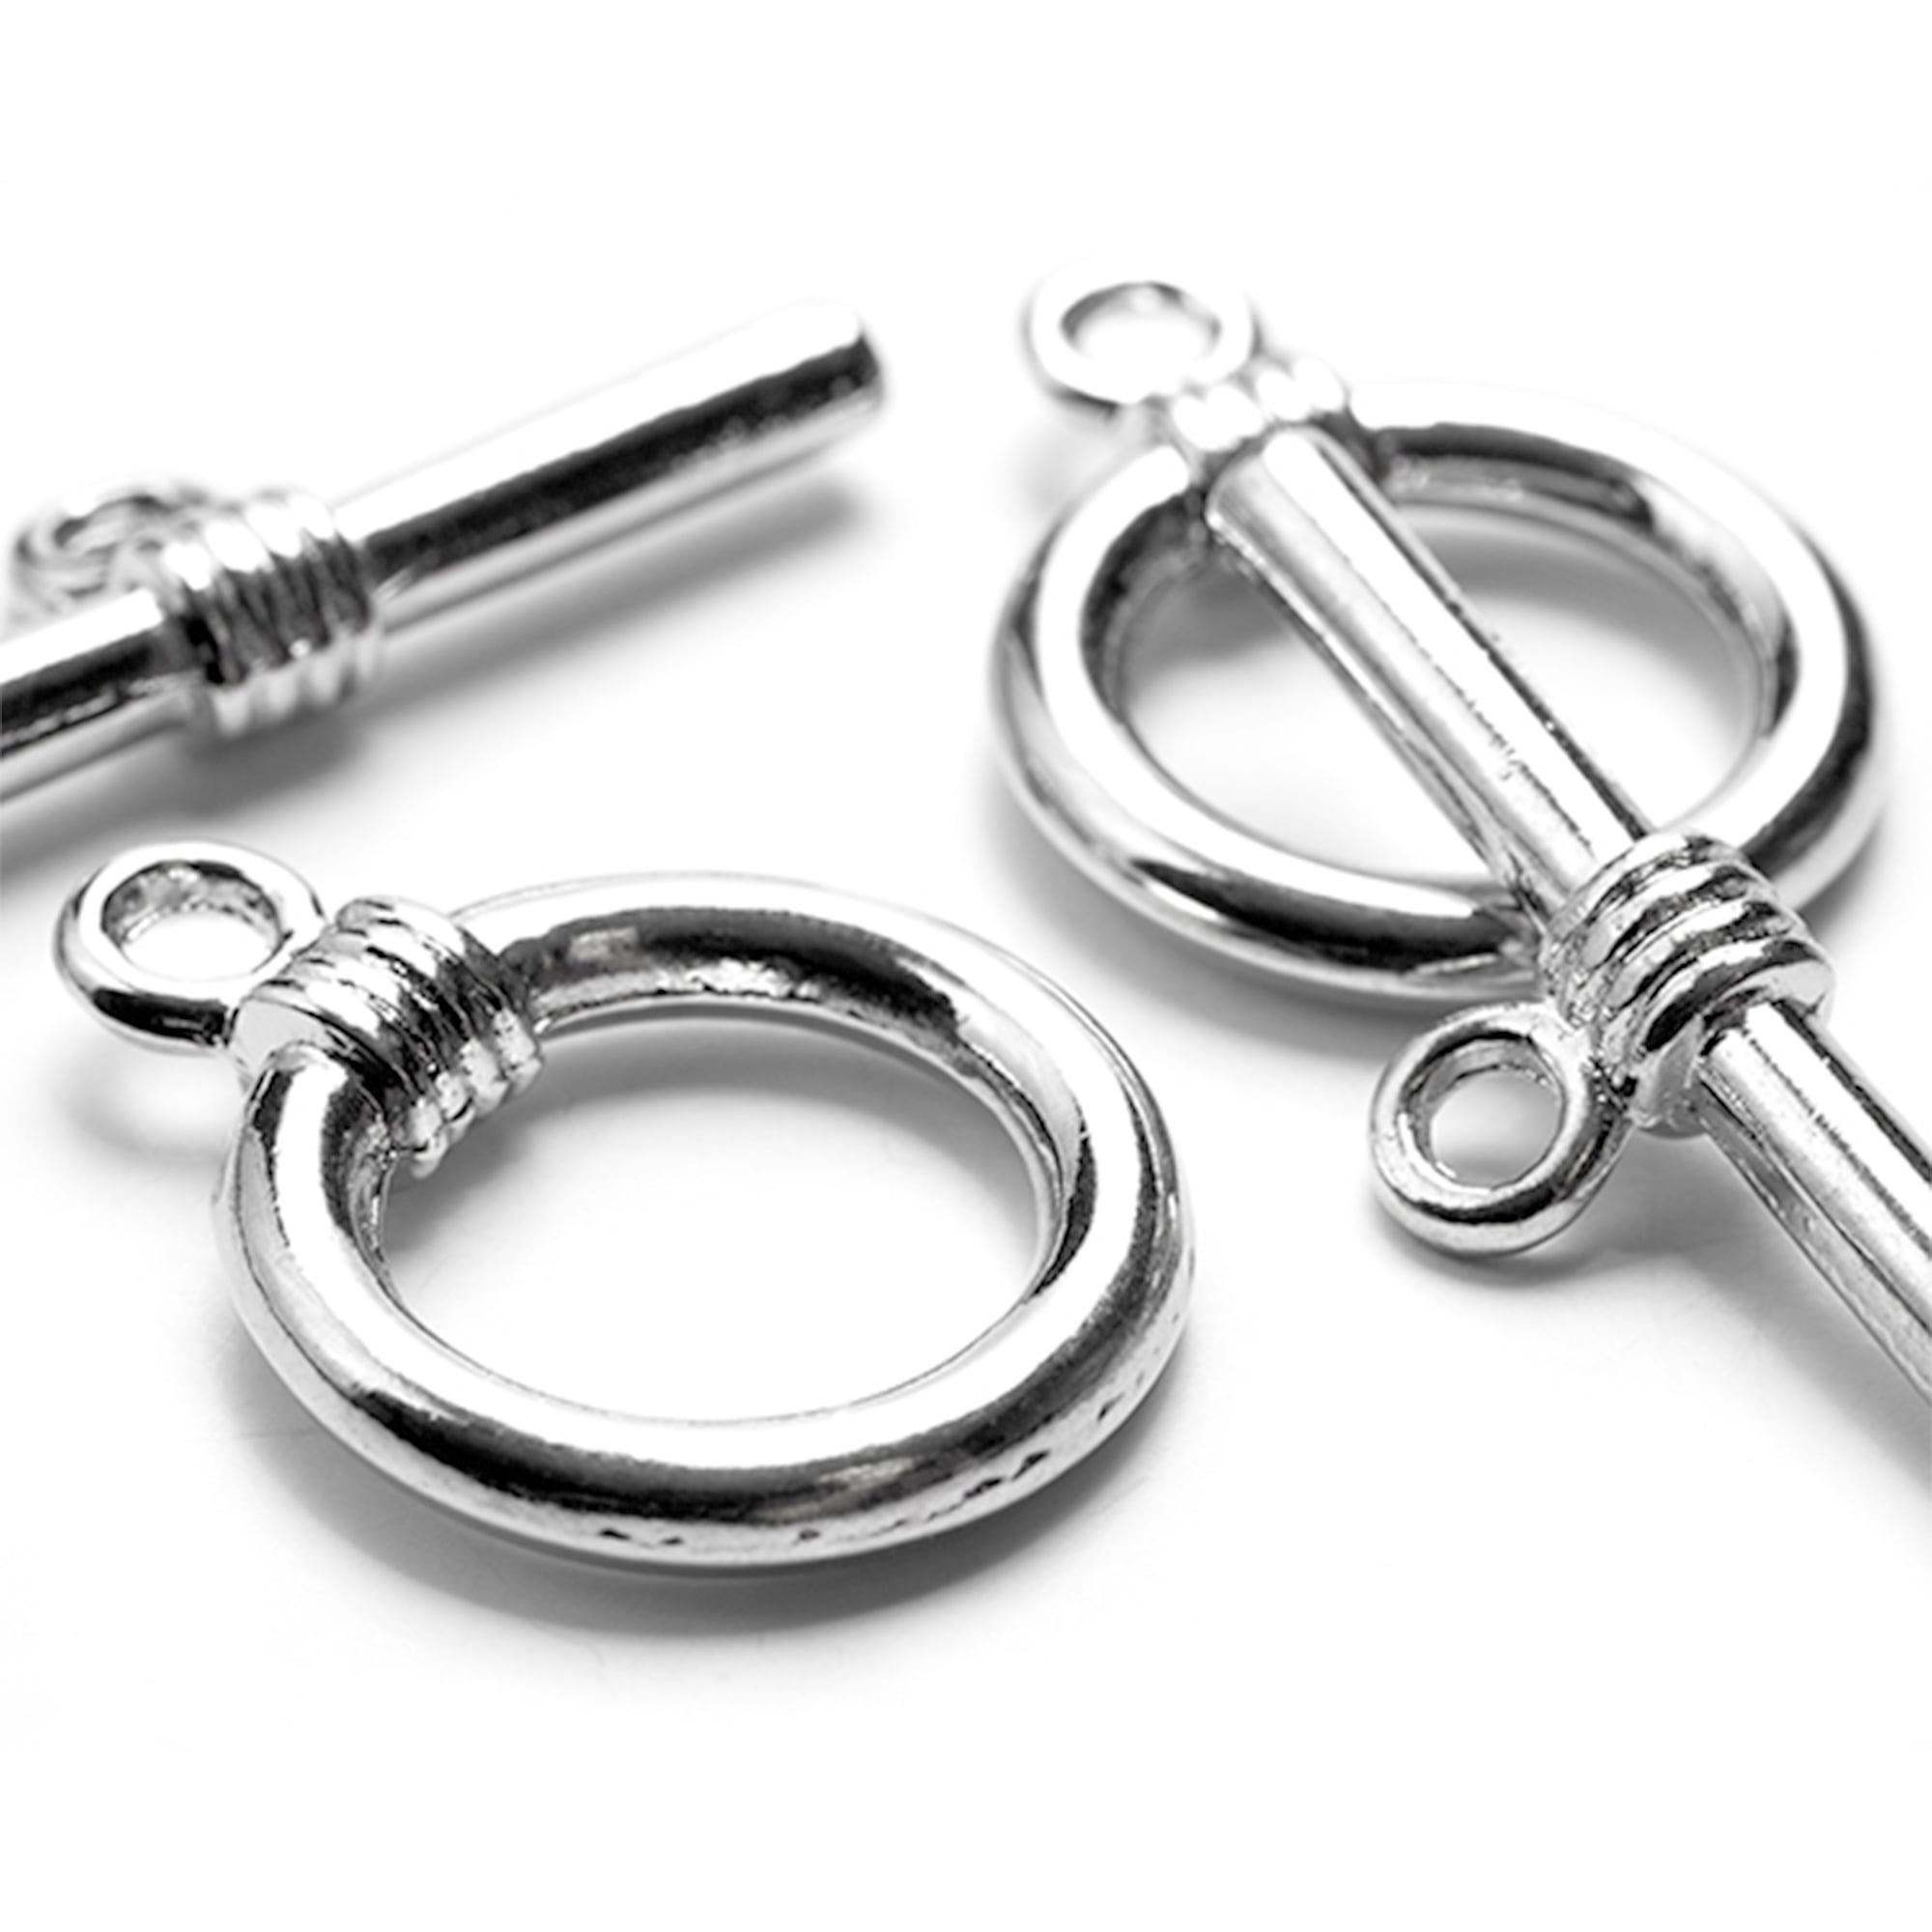 Silver Large Round Toggle, 4 Piece 